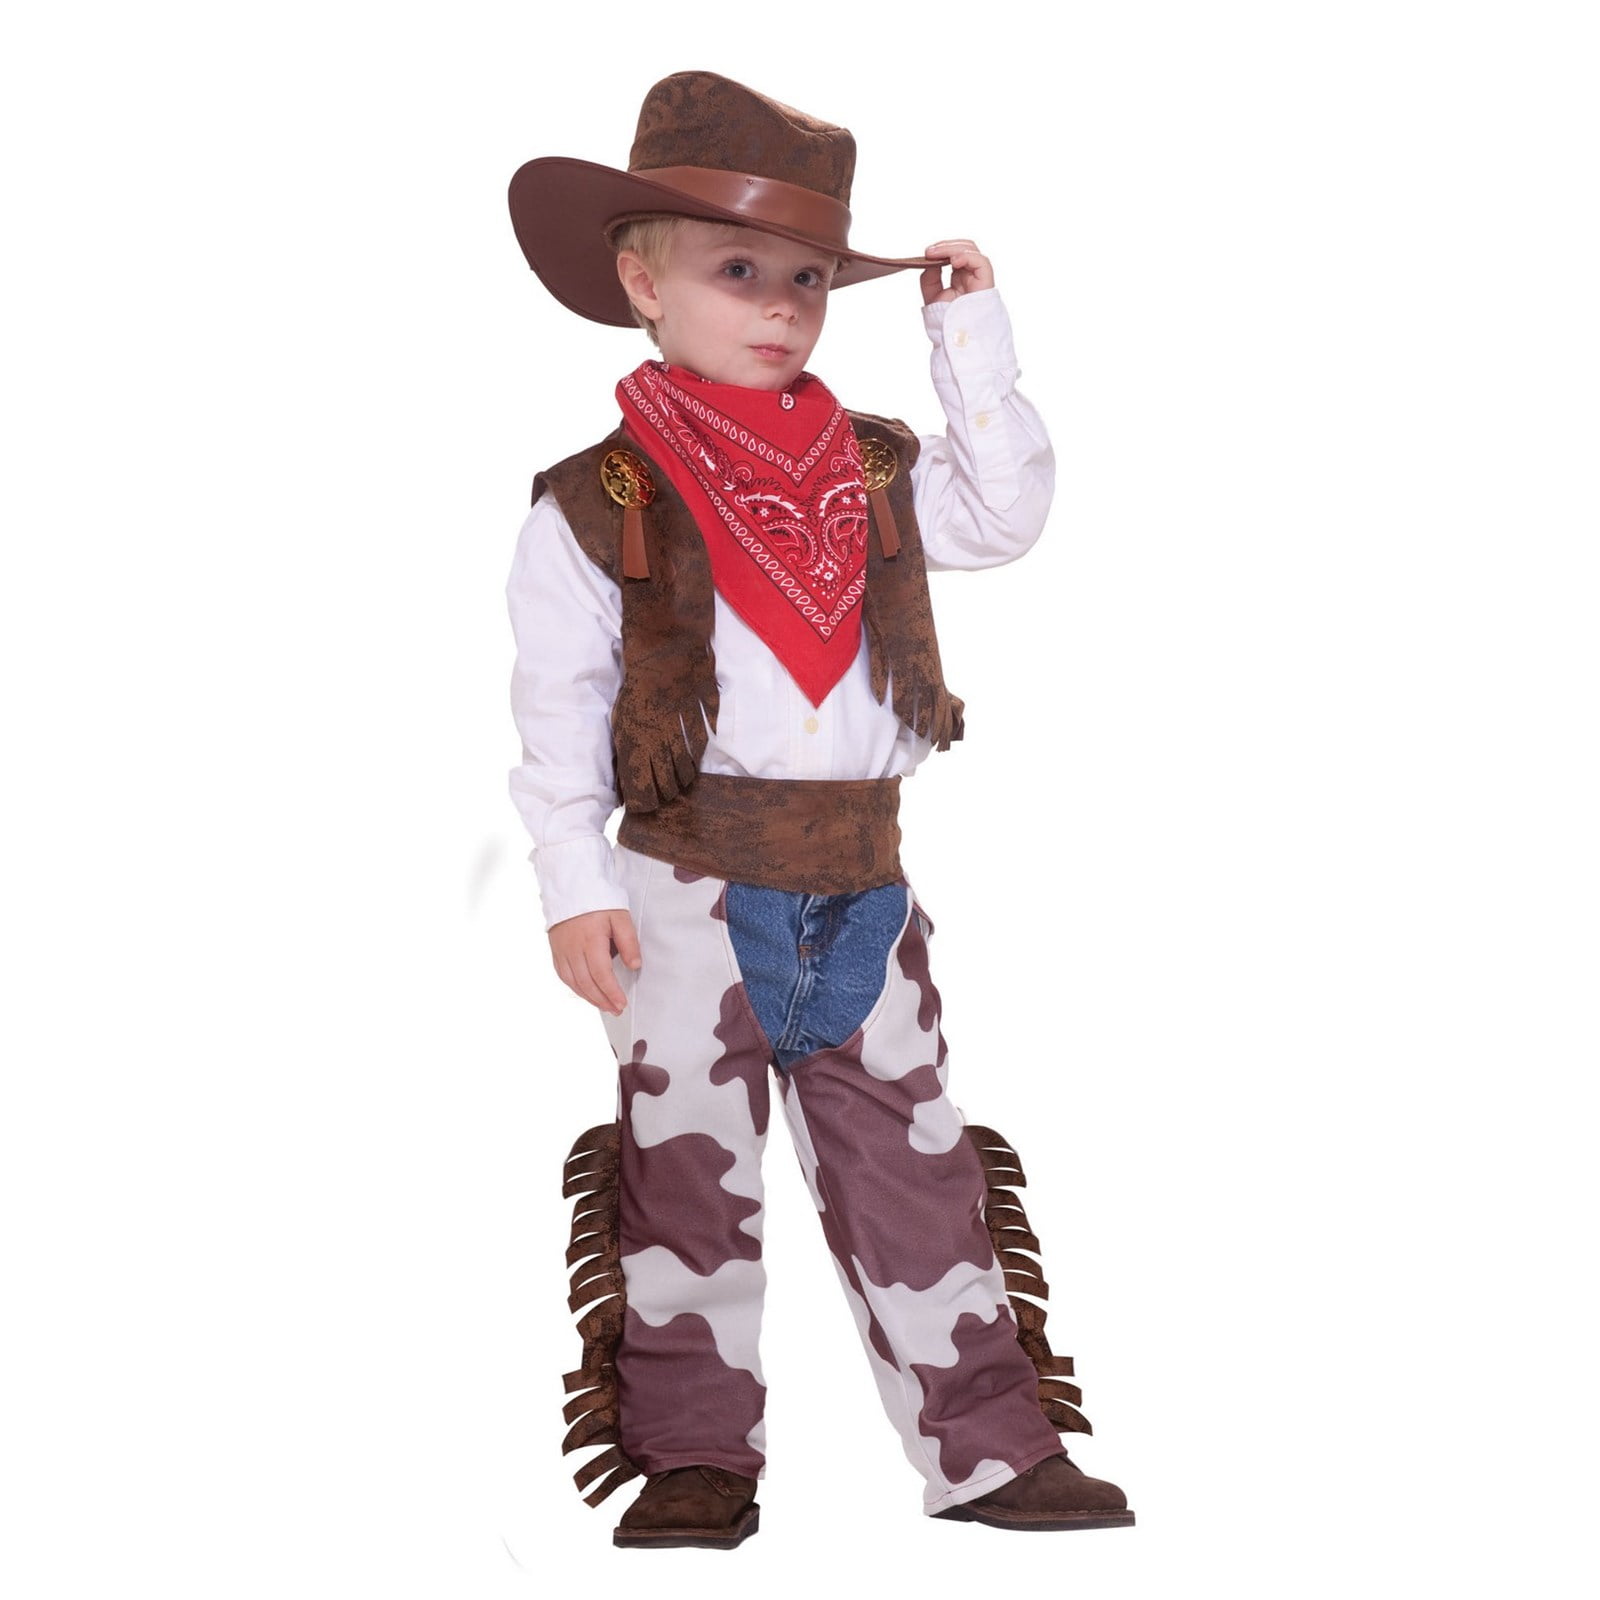 Texan Cowboy Costume & Hat Childrens Boys World Book Day Week Fancy Dress Outfit 